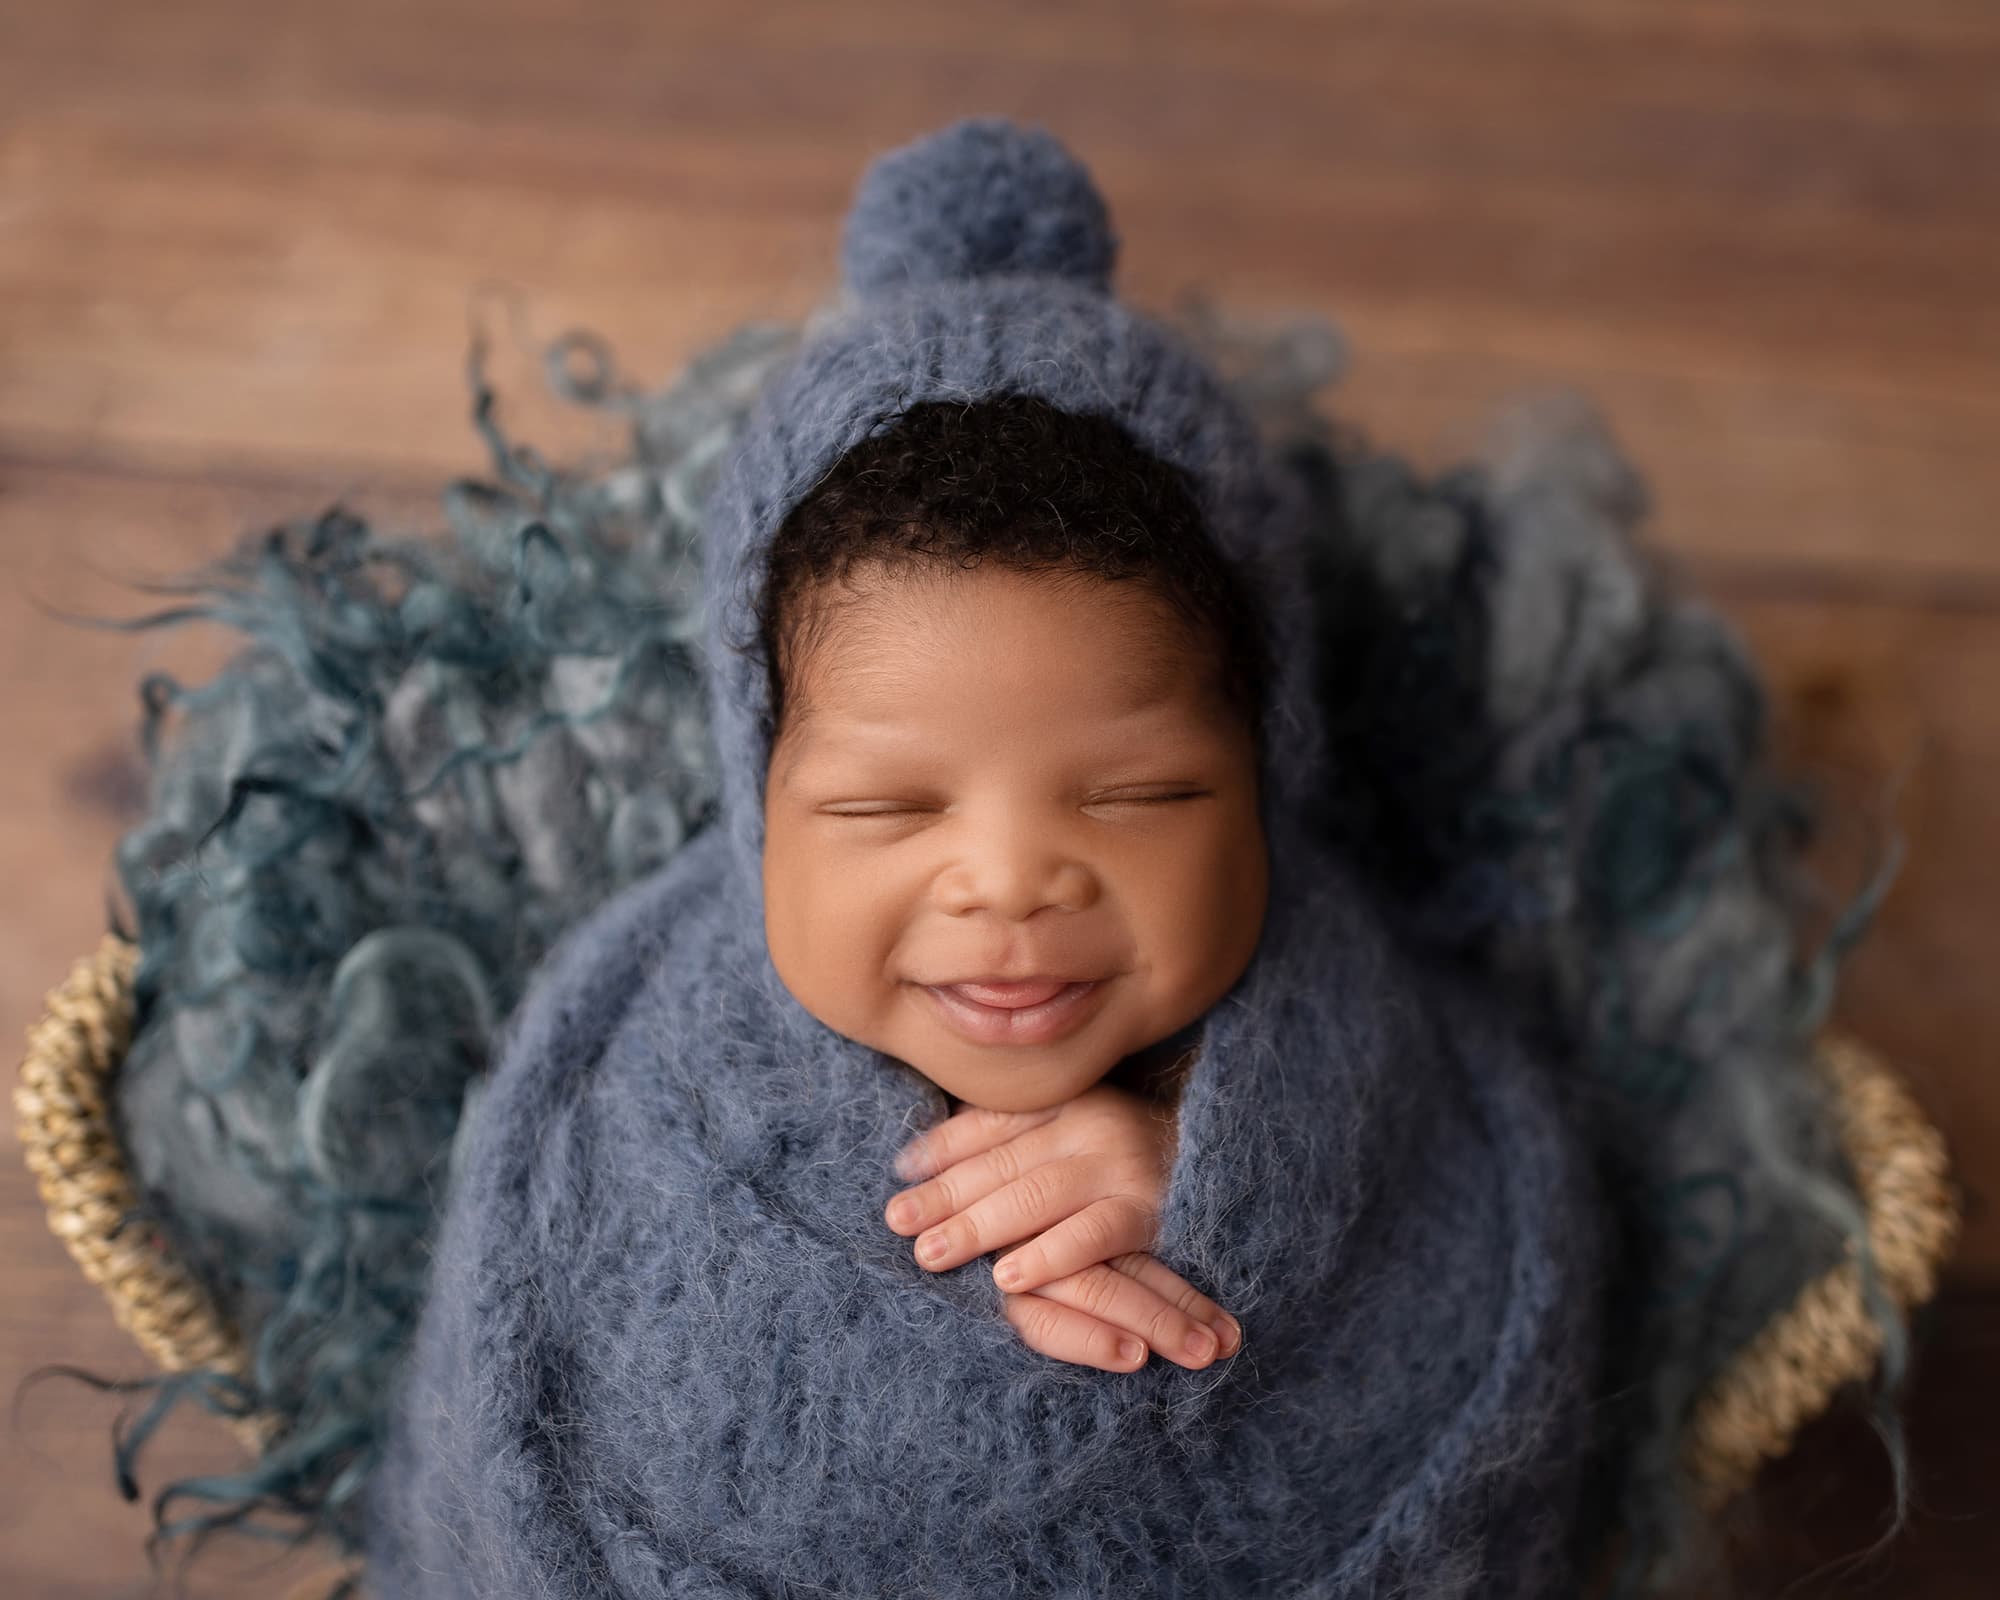 A smiling newborn baby wrapped in a blue fuzzy blanket and bonnet